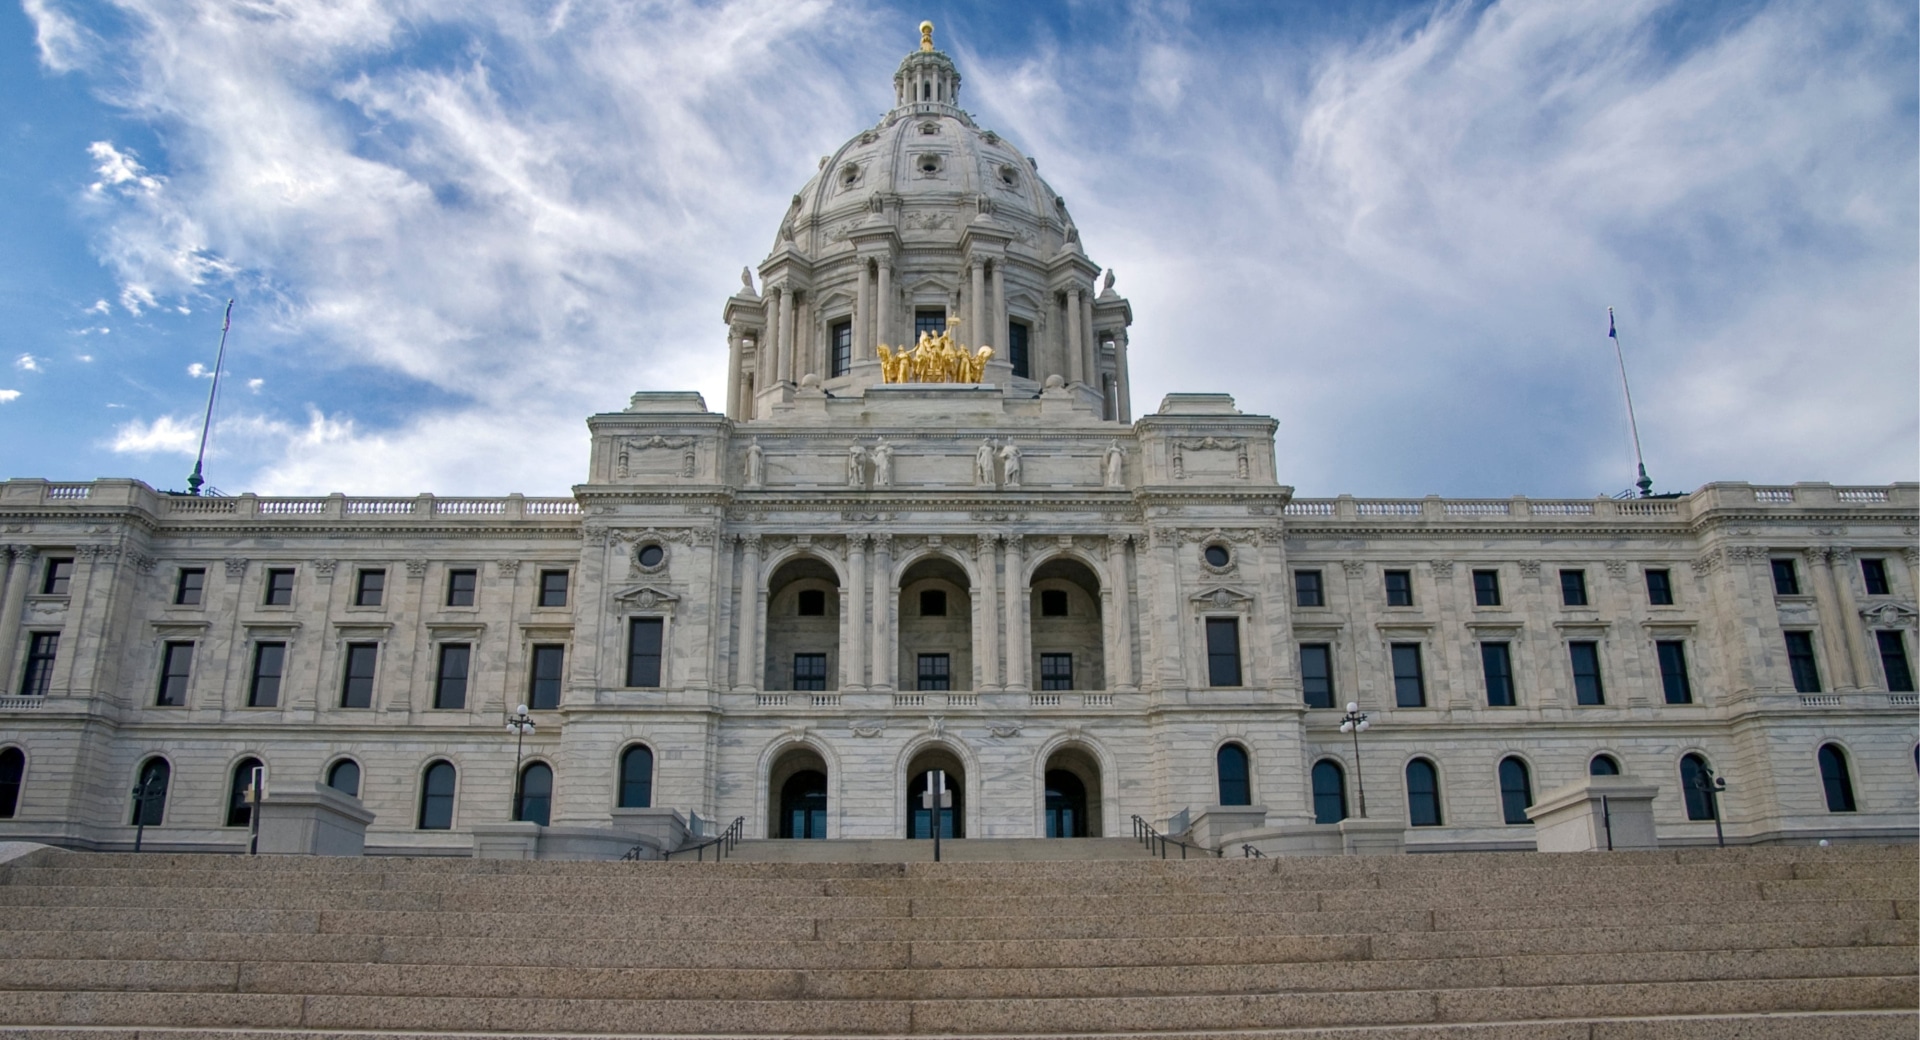 MinnCAP's 2021 Policy Agenda will support local poverty solutions especially needed in light of the impacts of COVID-19